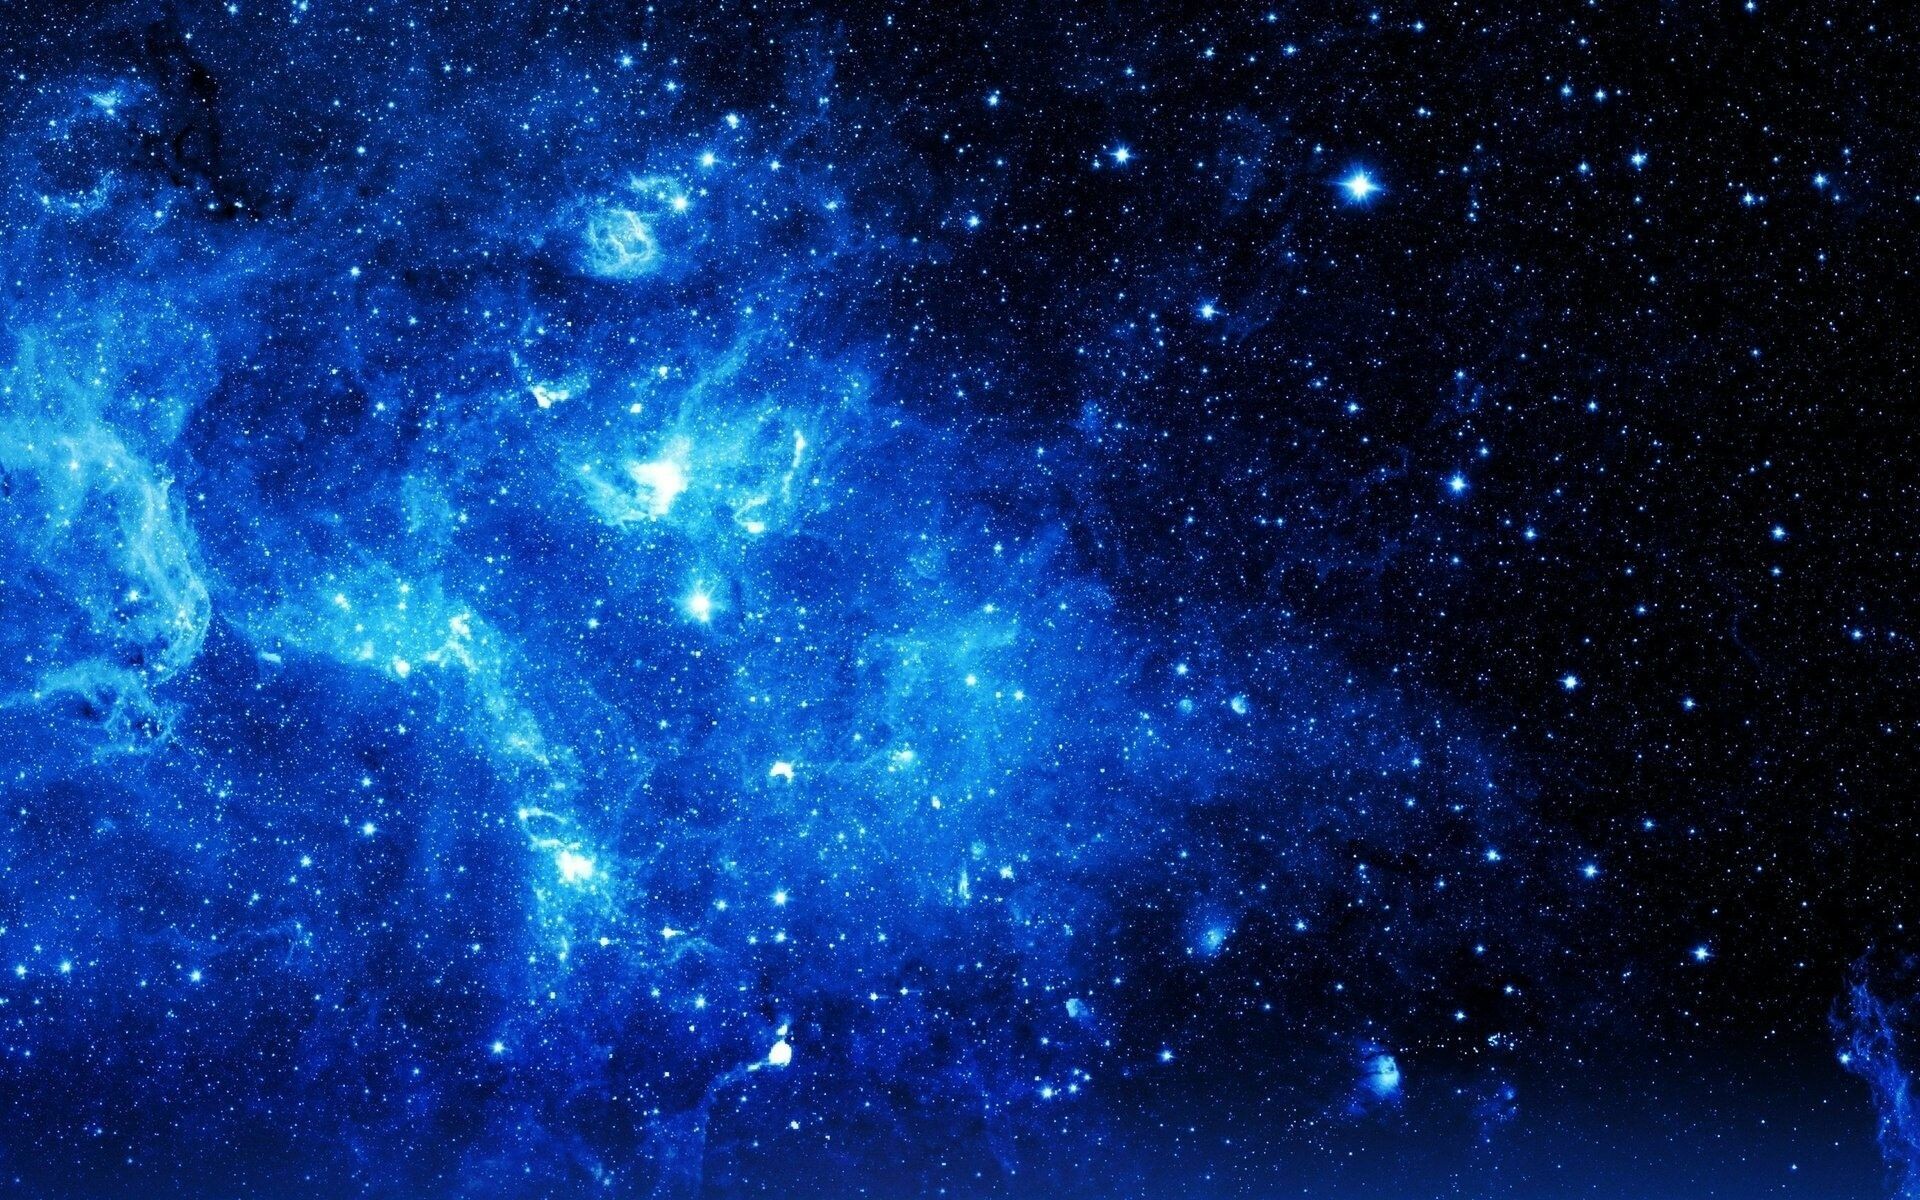 72+ Blue Universe Space Wallpapers: HD, 4K, 5K for PC and Mobile | Download  free images for iPhone, Android